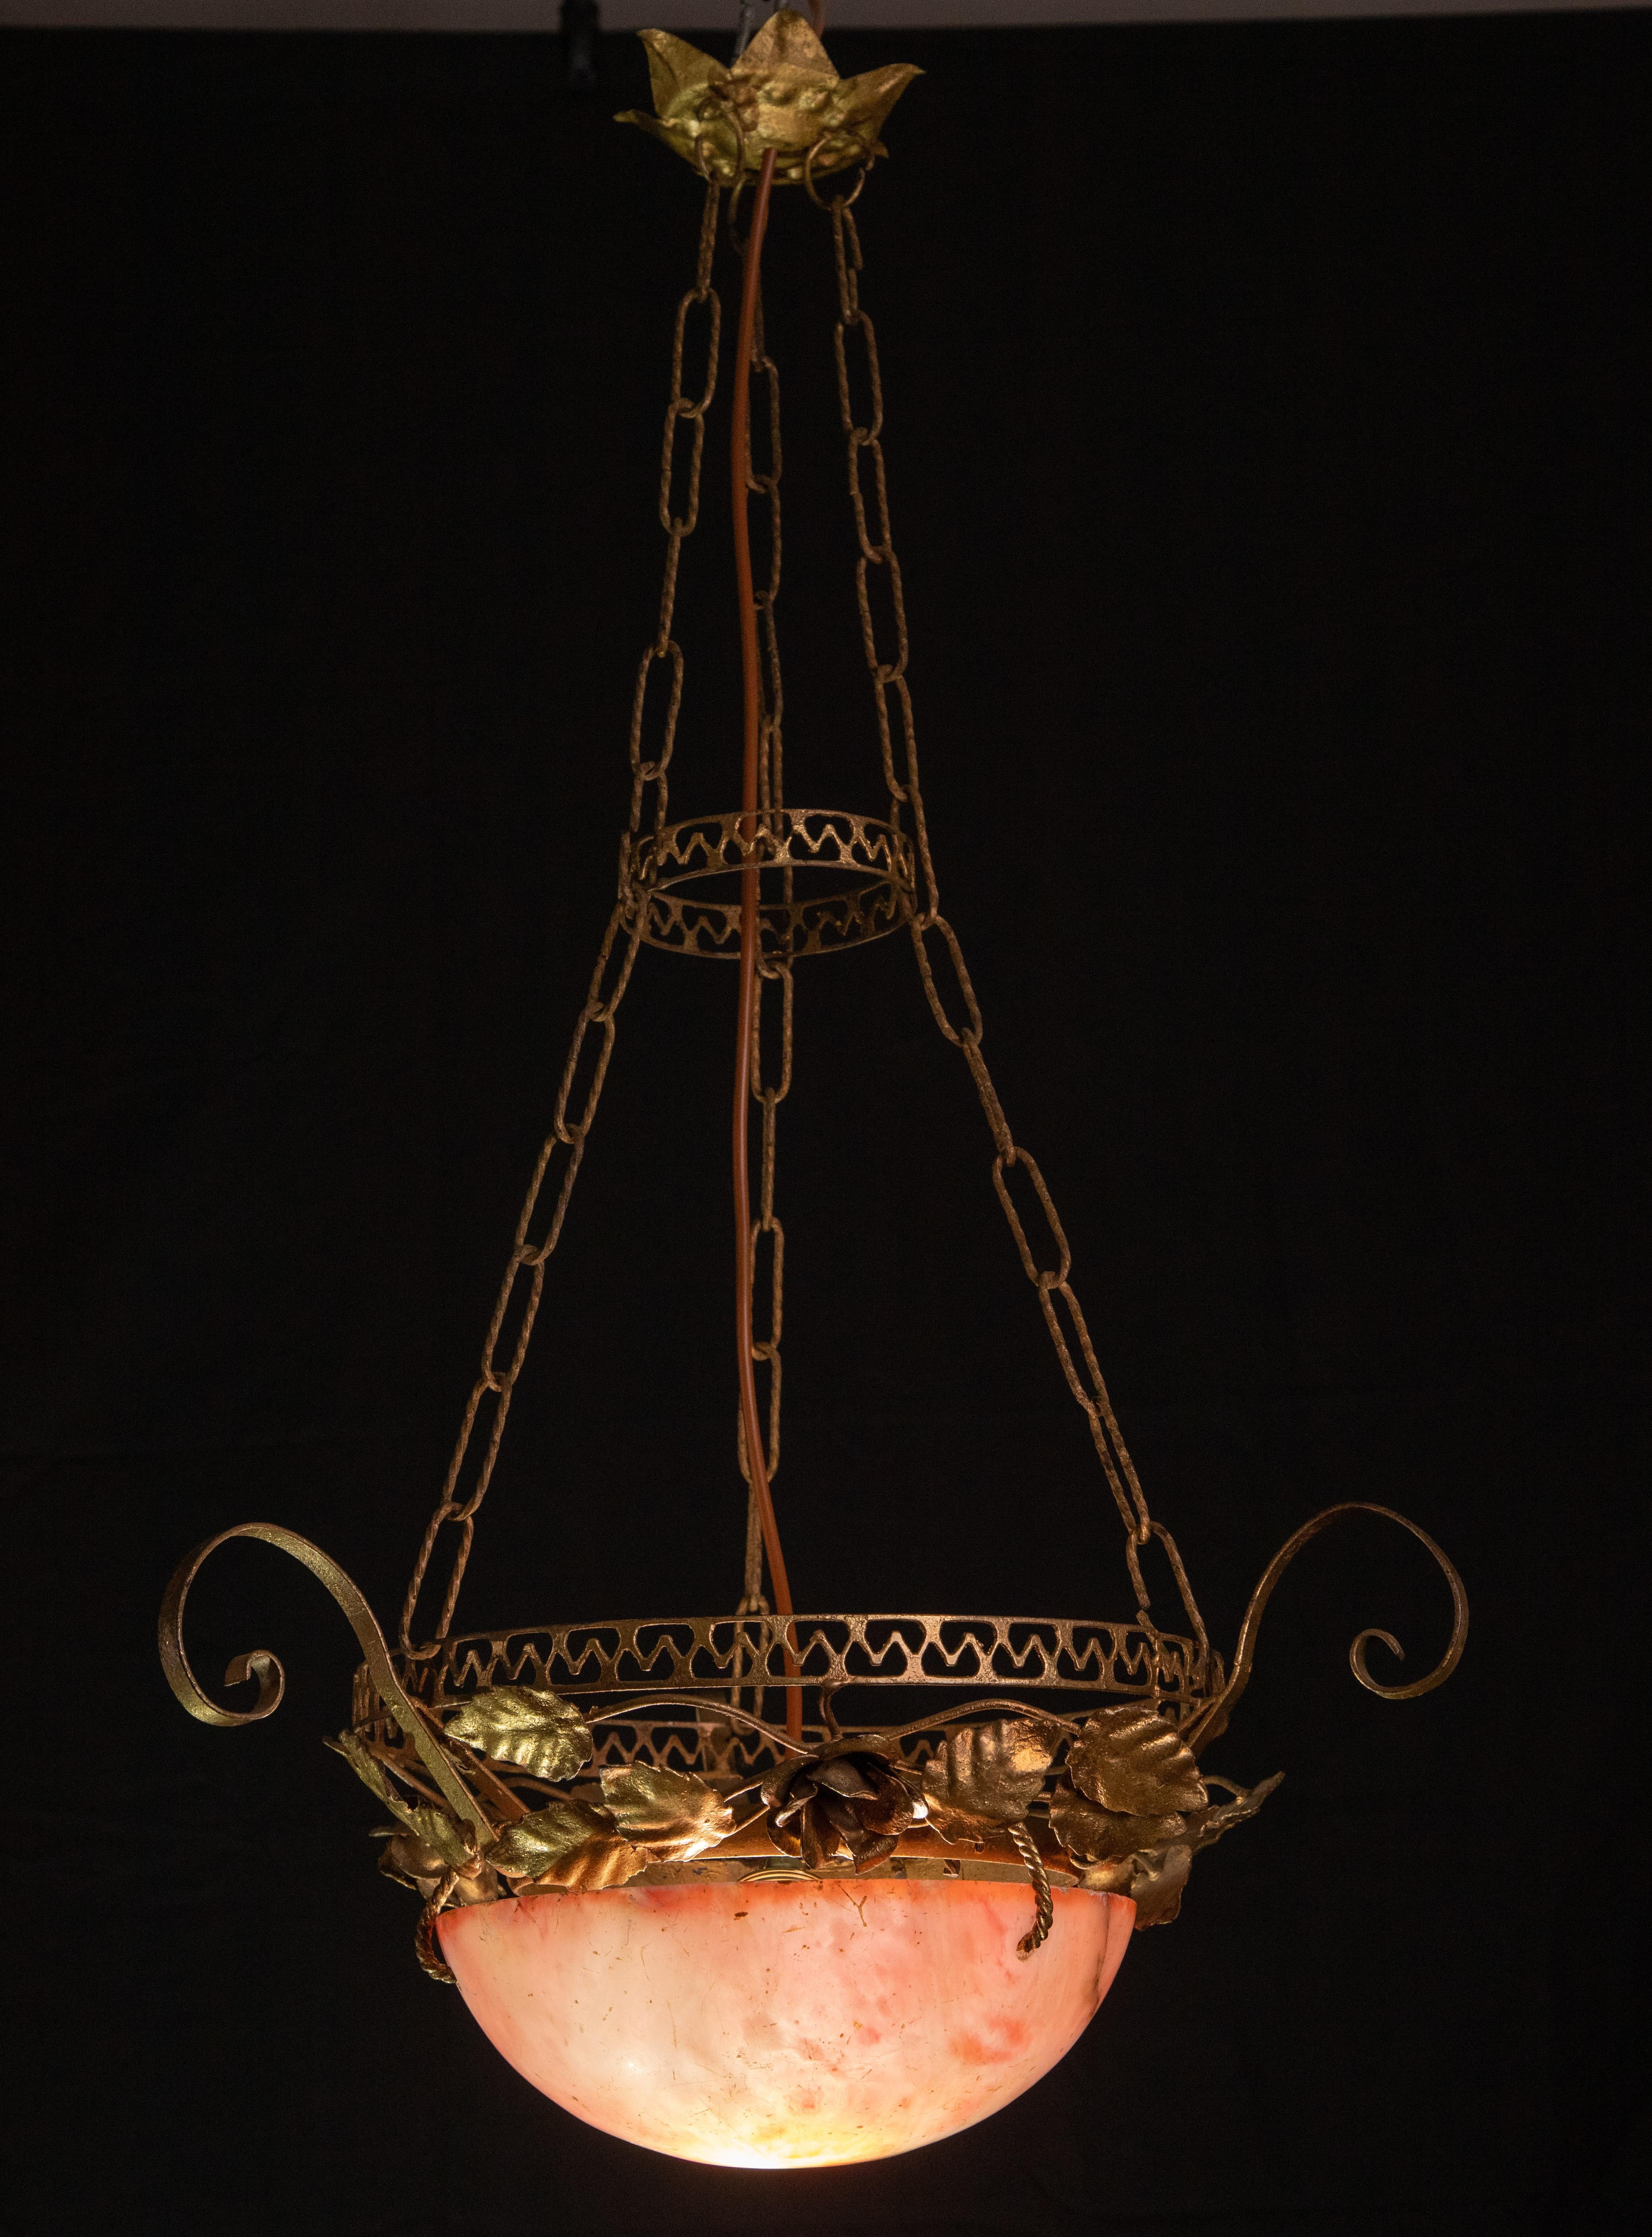 Extraordinary Antique red alabaster hanging chandelier with iron structure, perfectly restored
circa 1910s, extremely rare.
A unique piece in red alabaster, beautifully worked with shades and reflections of other colors when lit, still suspended